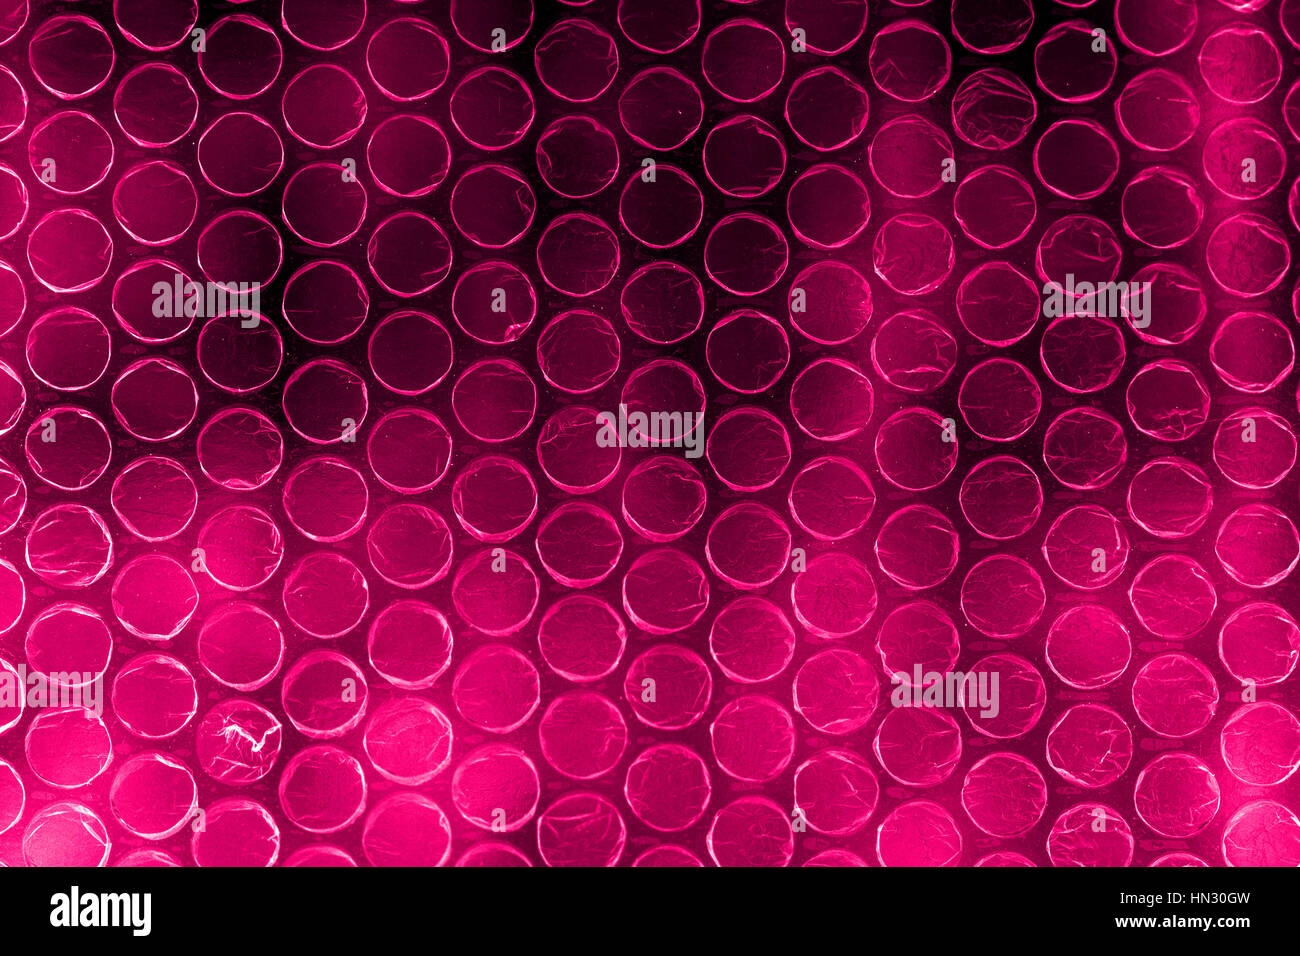 Plastic polymer bubble wrap in high contrast vivid reddish pink color Stock Photo